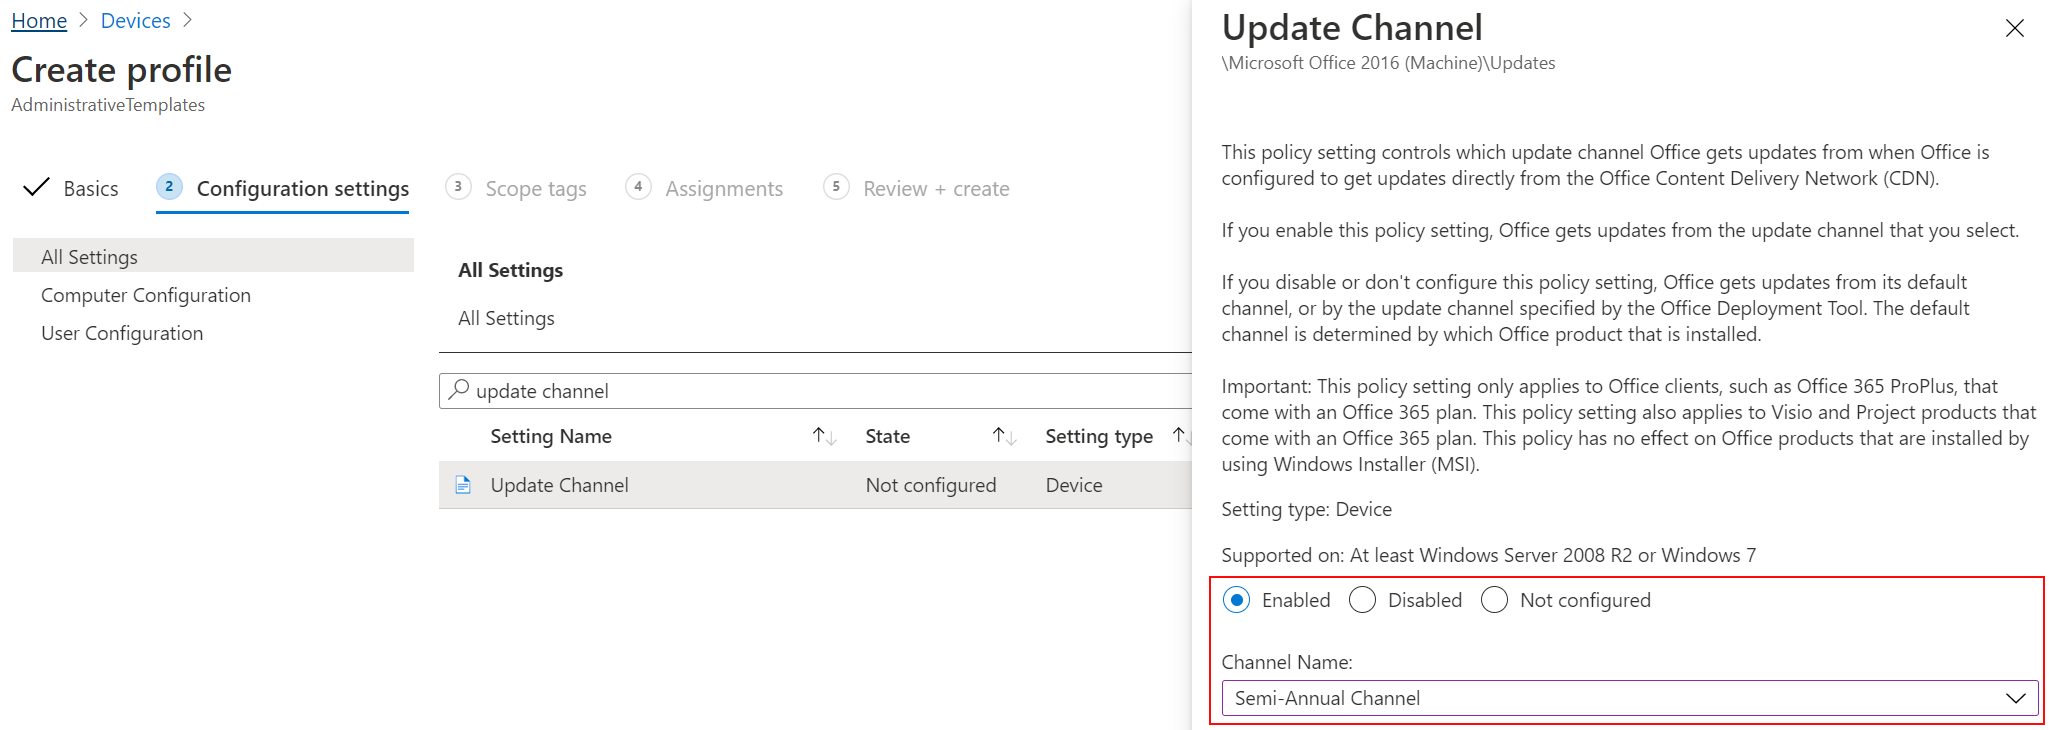 In Microsoft Intune and Intune admin center, create an administrative ADMX template that sets the Update Channel setting for Office.